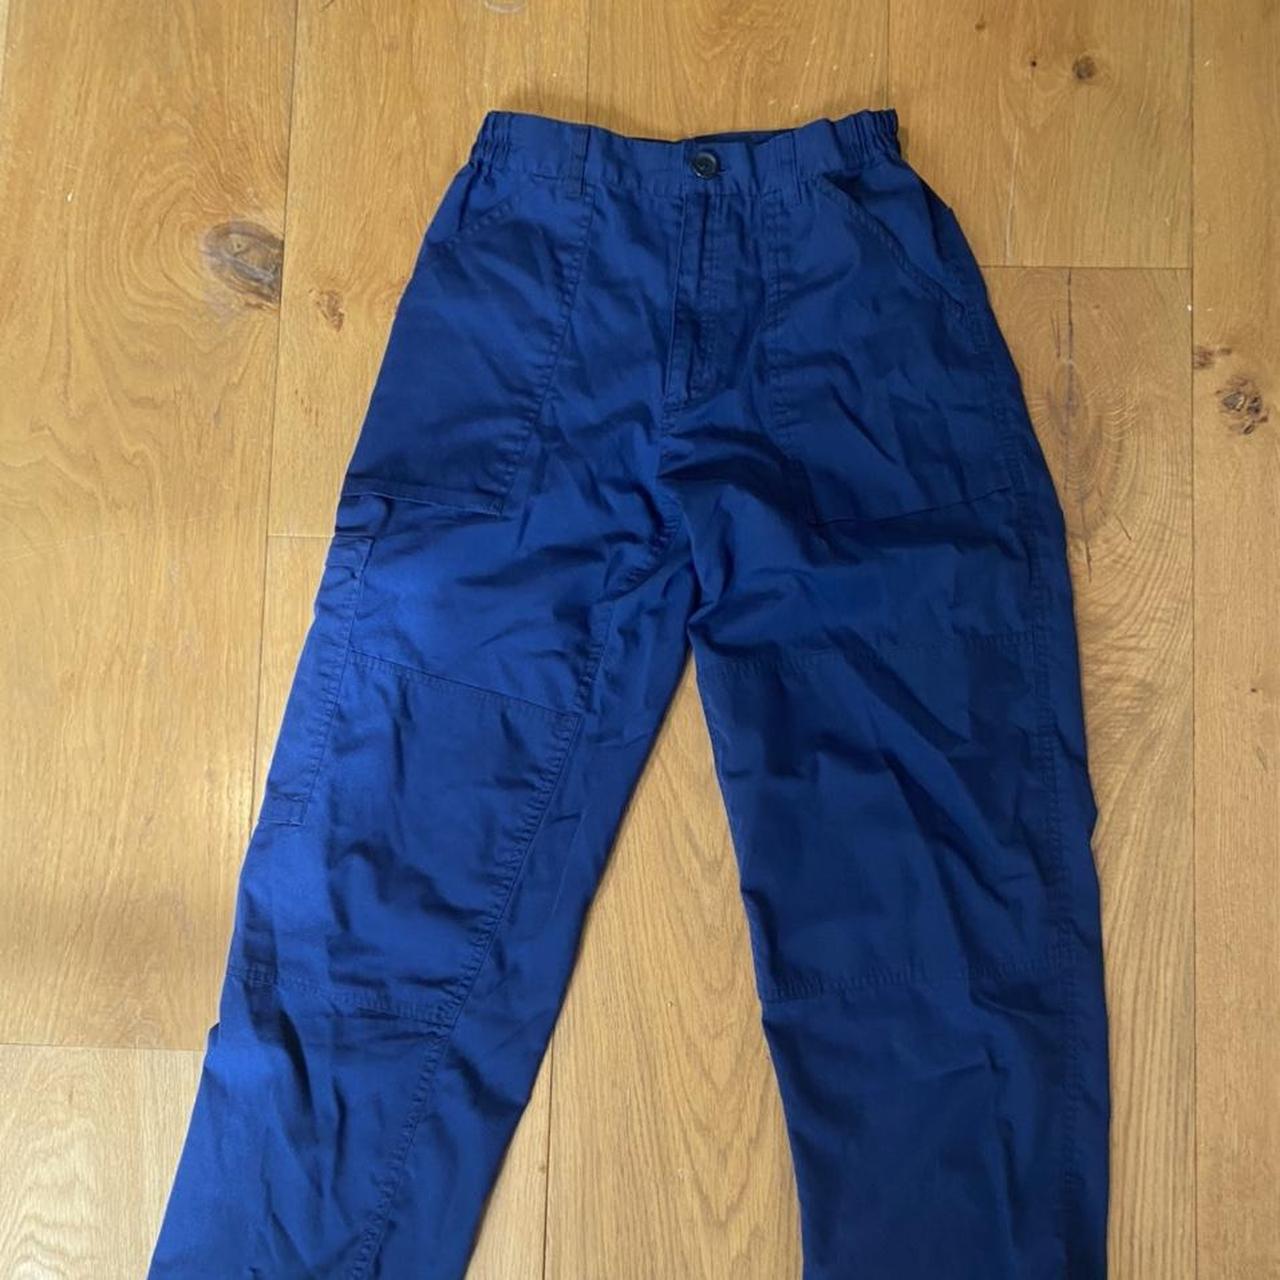 Navy blue cargo trousers with pocket details... - Depop